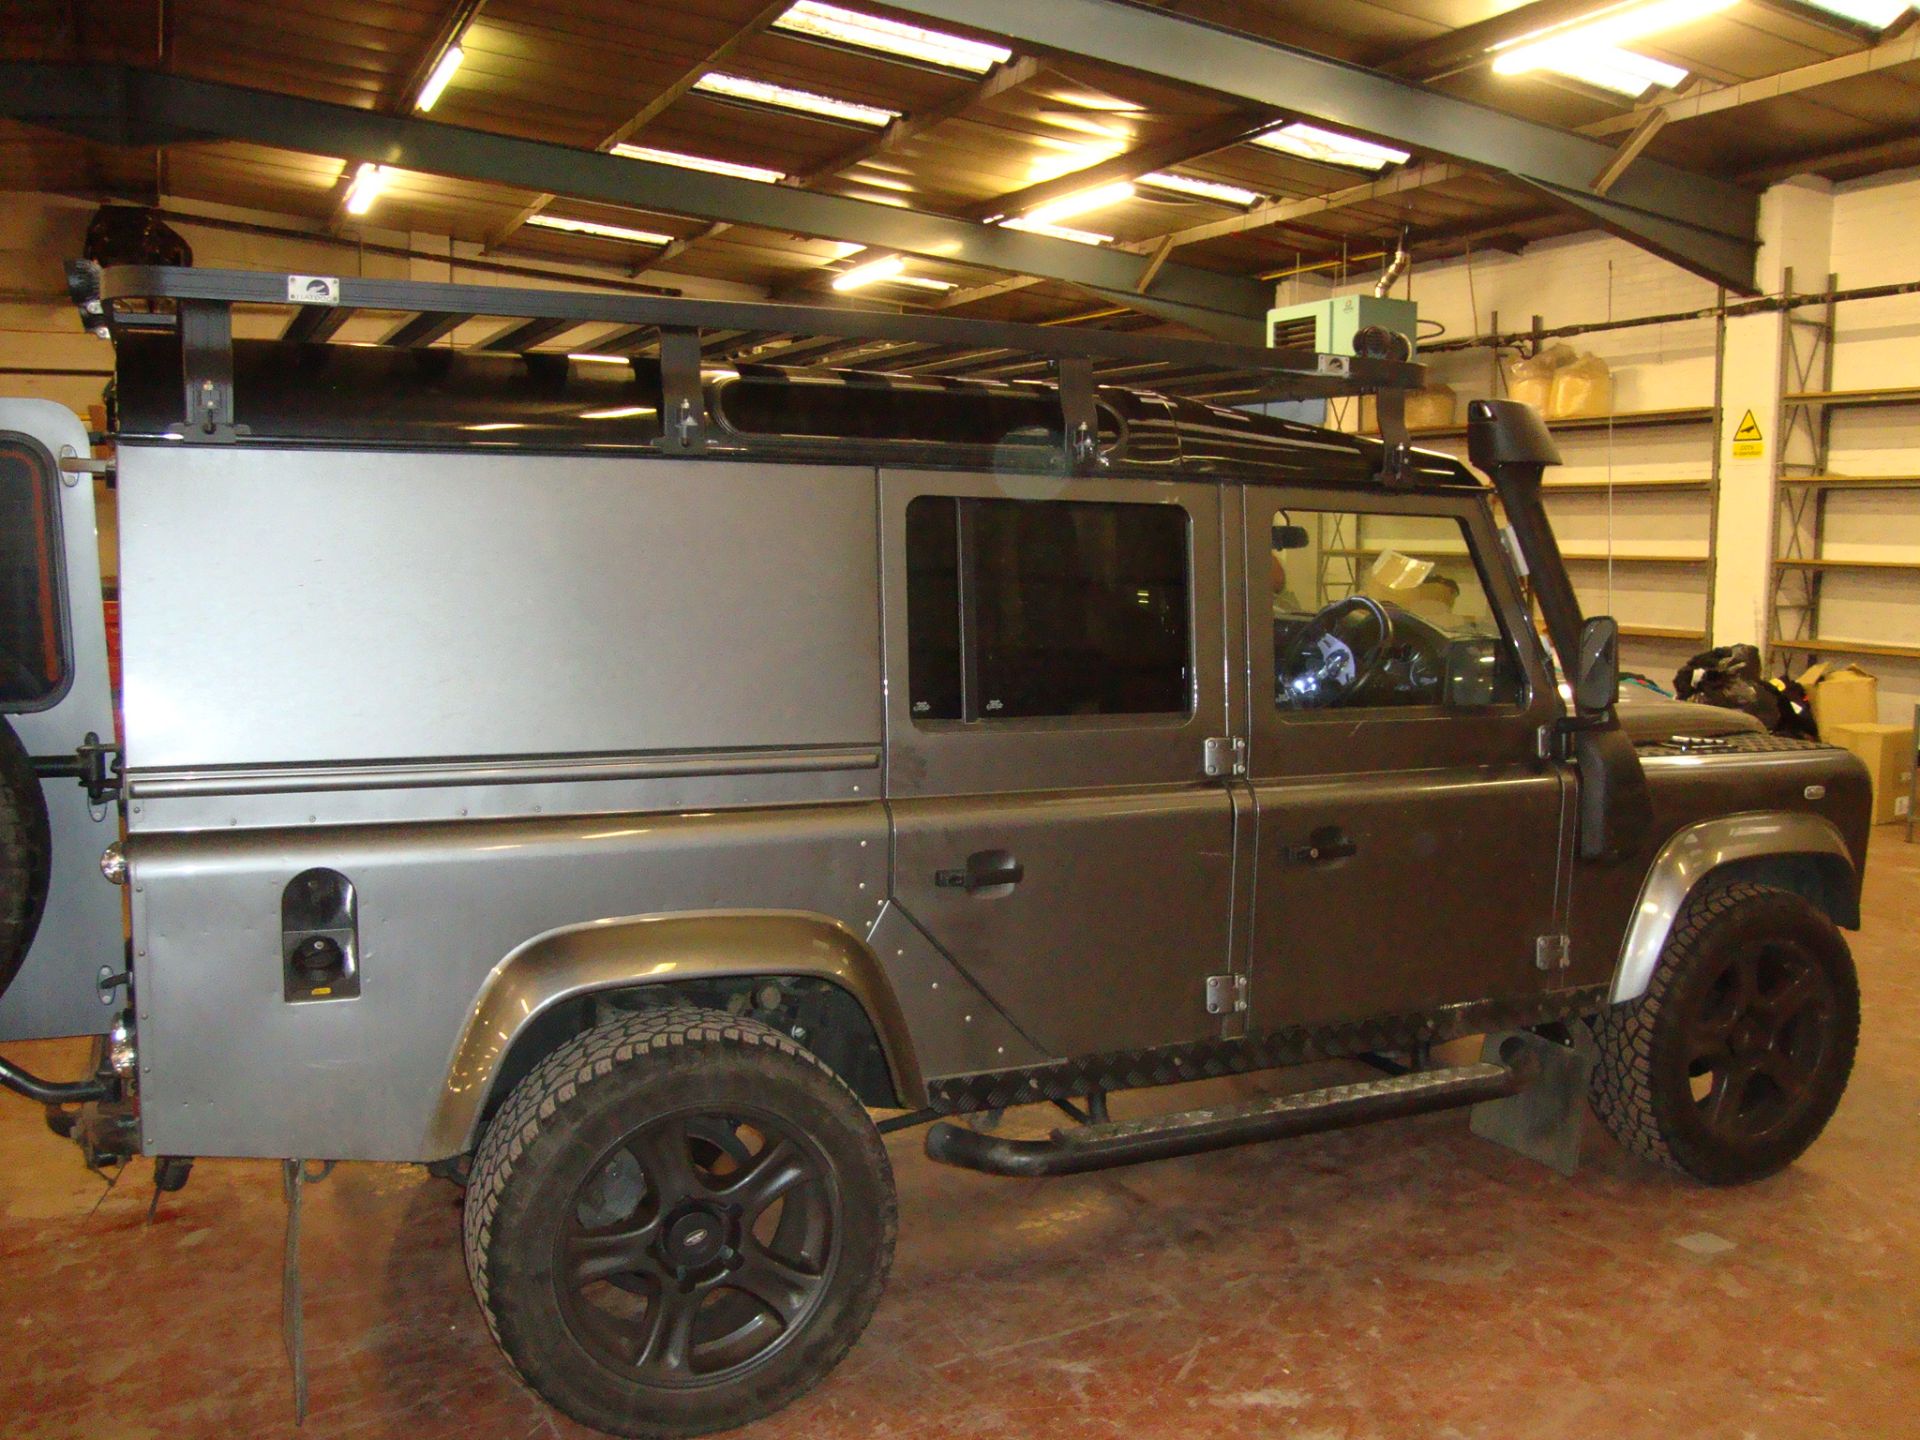 2014 Land Rover Defender 110 XS 2.2 TDCi Utility Wagon SMC Over Land Flat Dog Special - Image 20 of 37